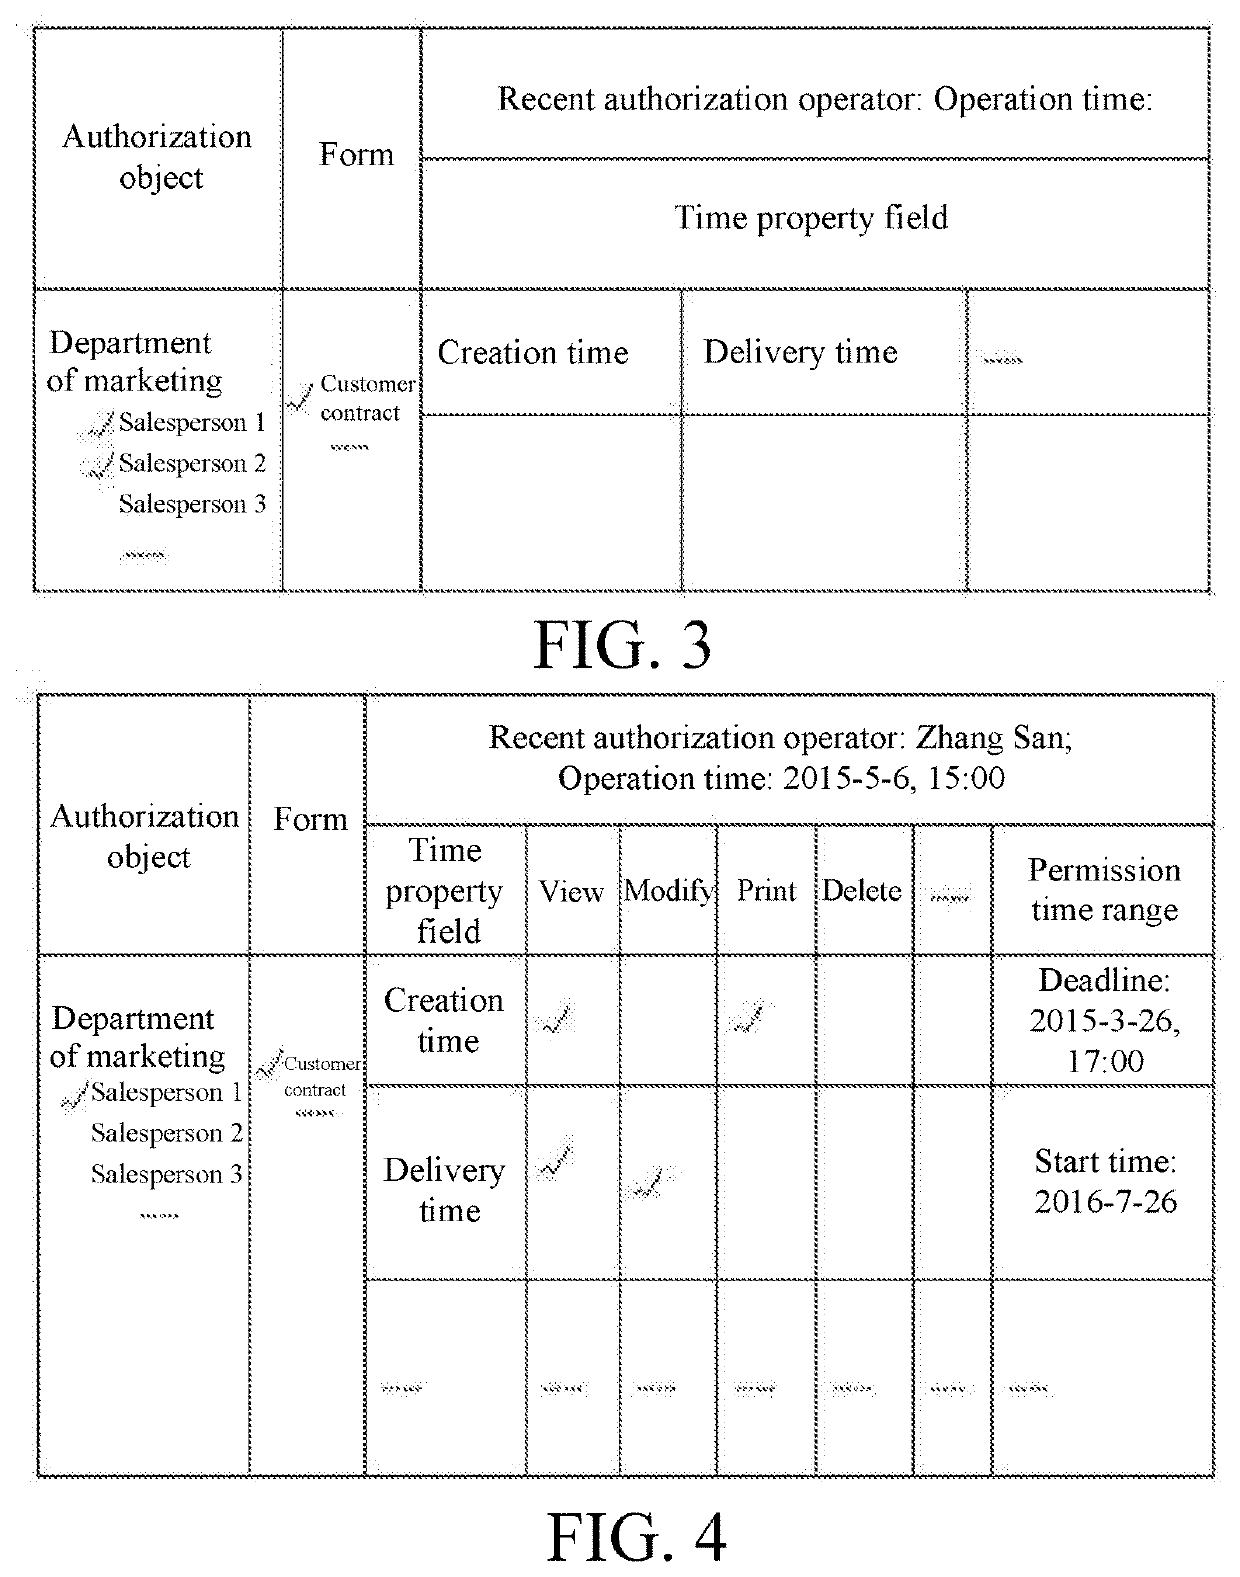 Form authority granting method based on time property fields of form